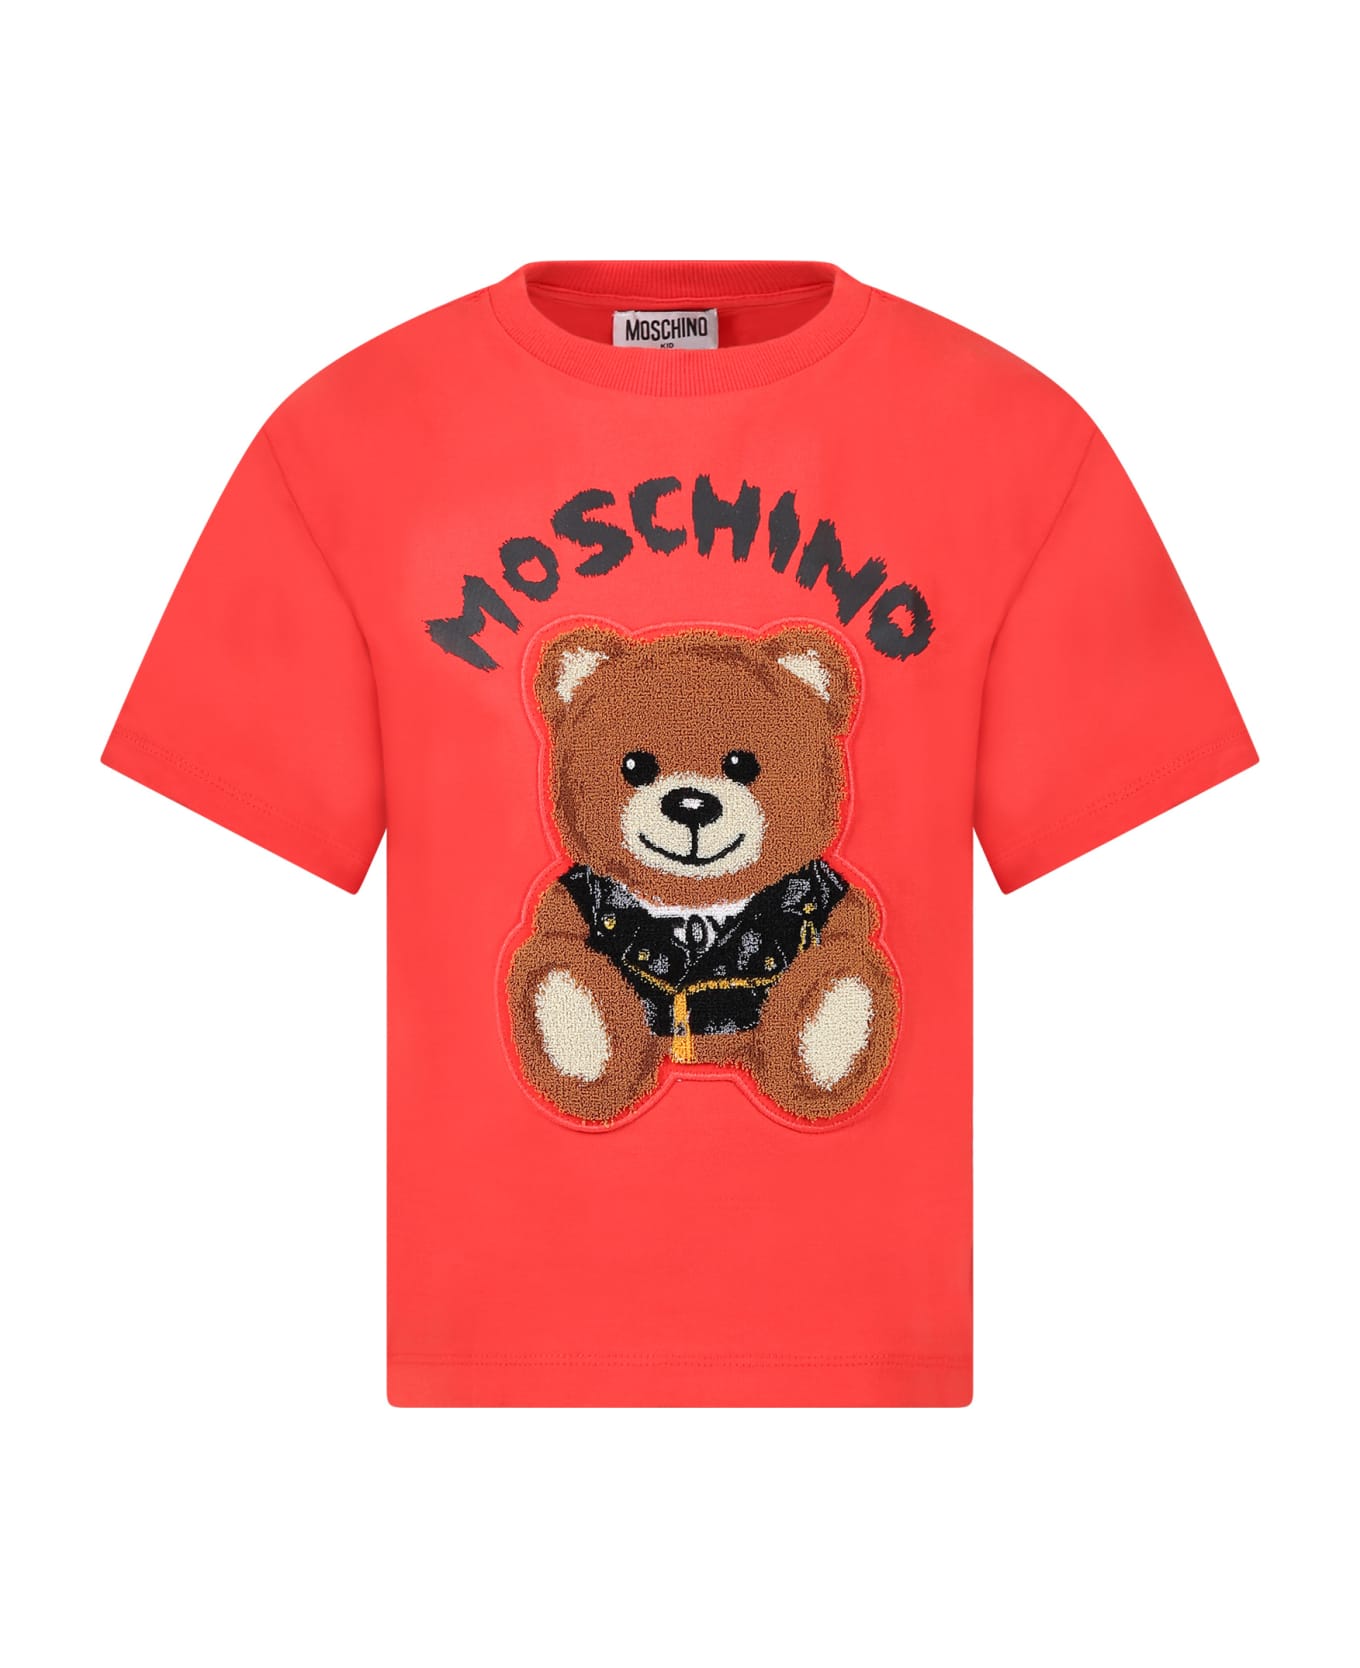 Moschino Red T-shirt For Kids With Logo And Teddy Bear - Red